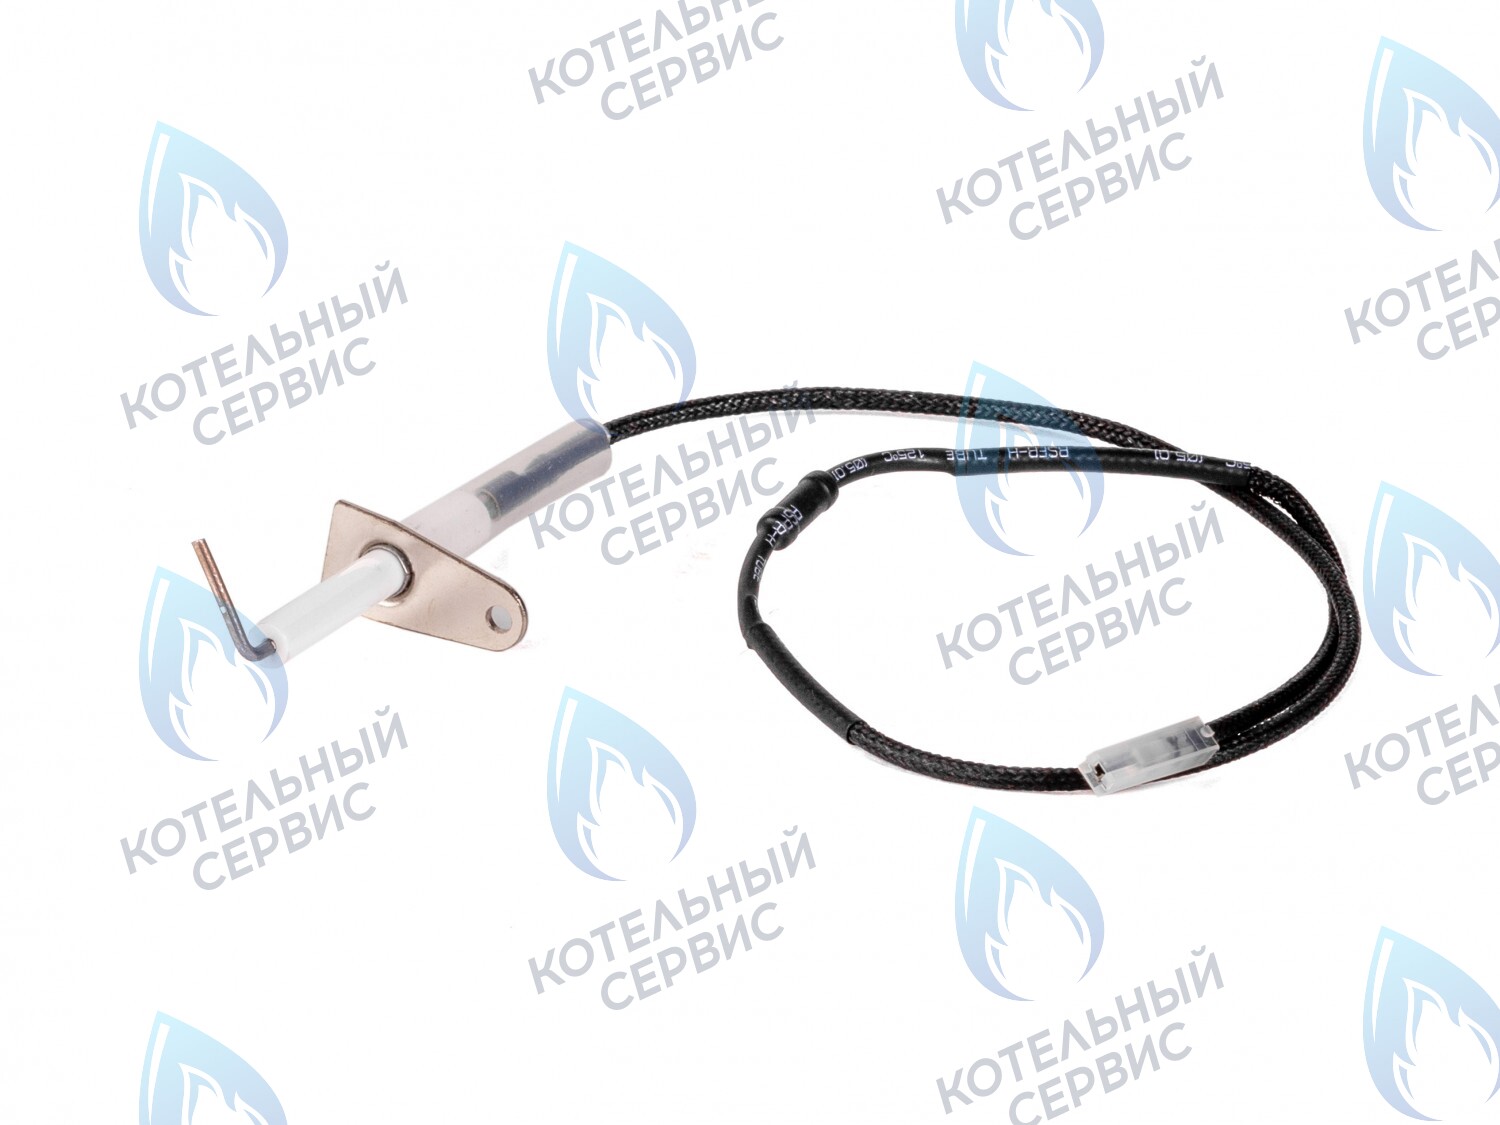 IE010 Электрод розжига и ионизации HAIER F21S(T), F21(T) (F01101, 0530002946), L1P18-F21(M)HEC (F01305, 0530016114) 